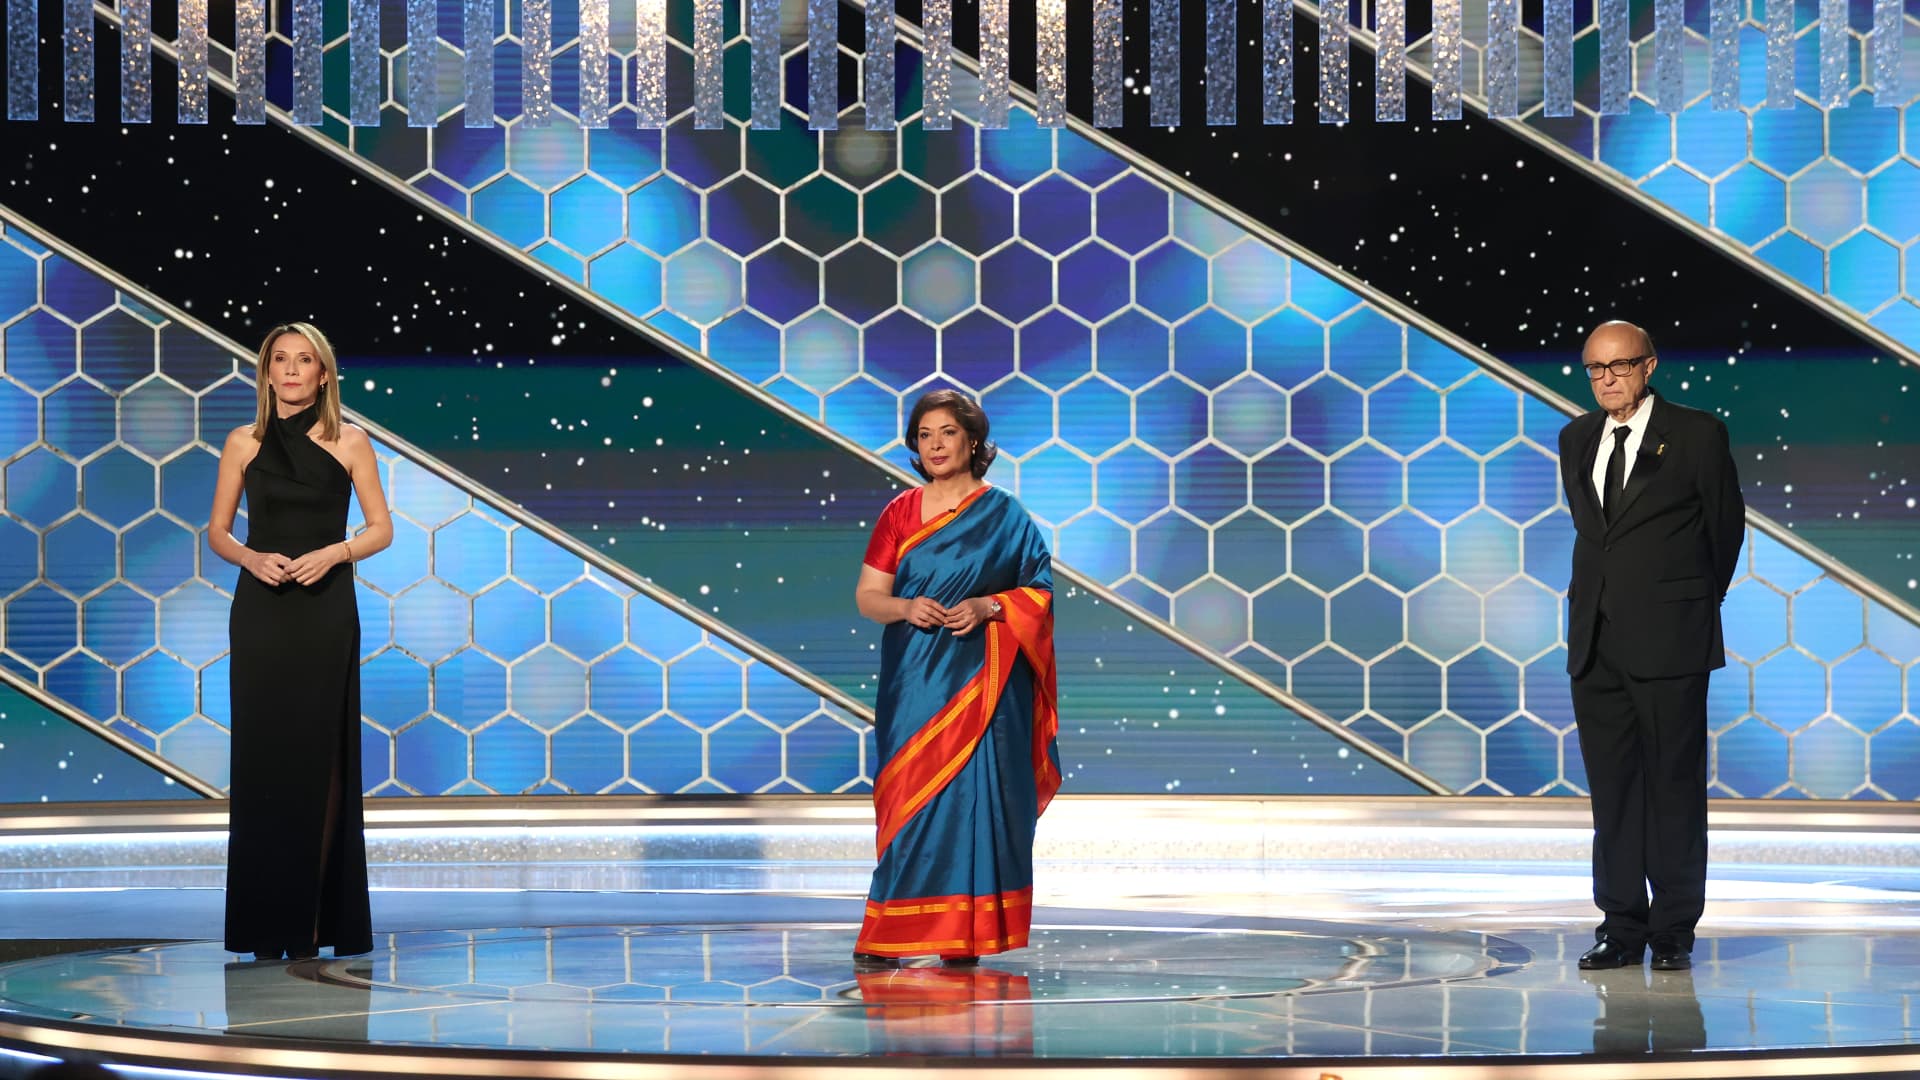 Pictured in this image released on February 28, (l-r) HFPA Vice President Helen Hoehne, HFPA Board Chair Meher Tatna, and HFPA President Ali Sar speak onstage at the 78th Annual Golden Globe Awards held at The Beverly Hilton and broadcast on February 28, 2021 in Beverly Hills, California.